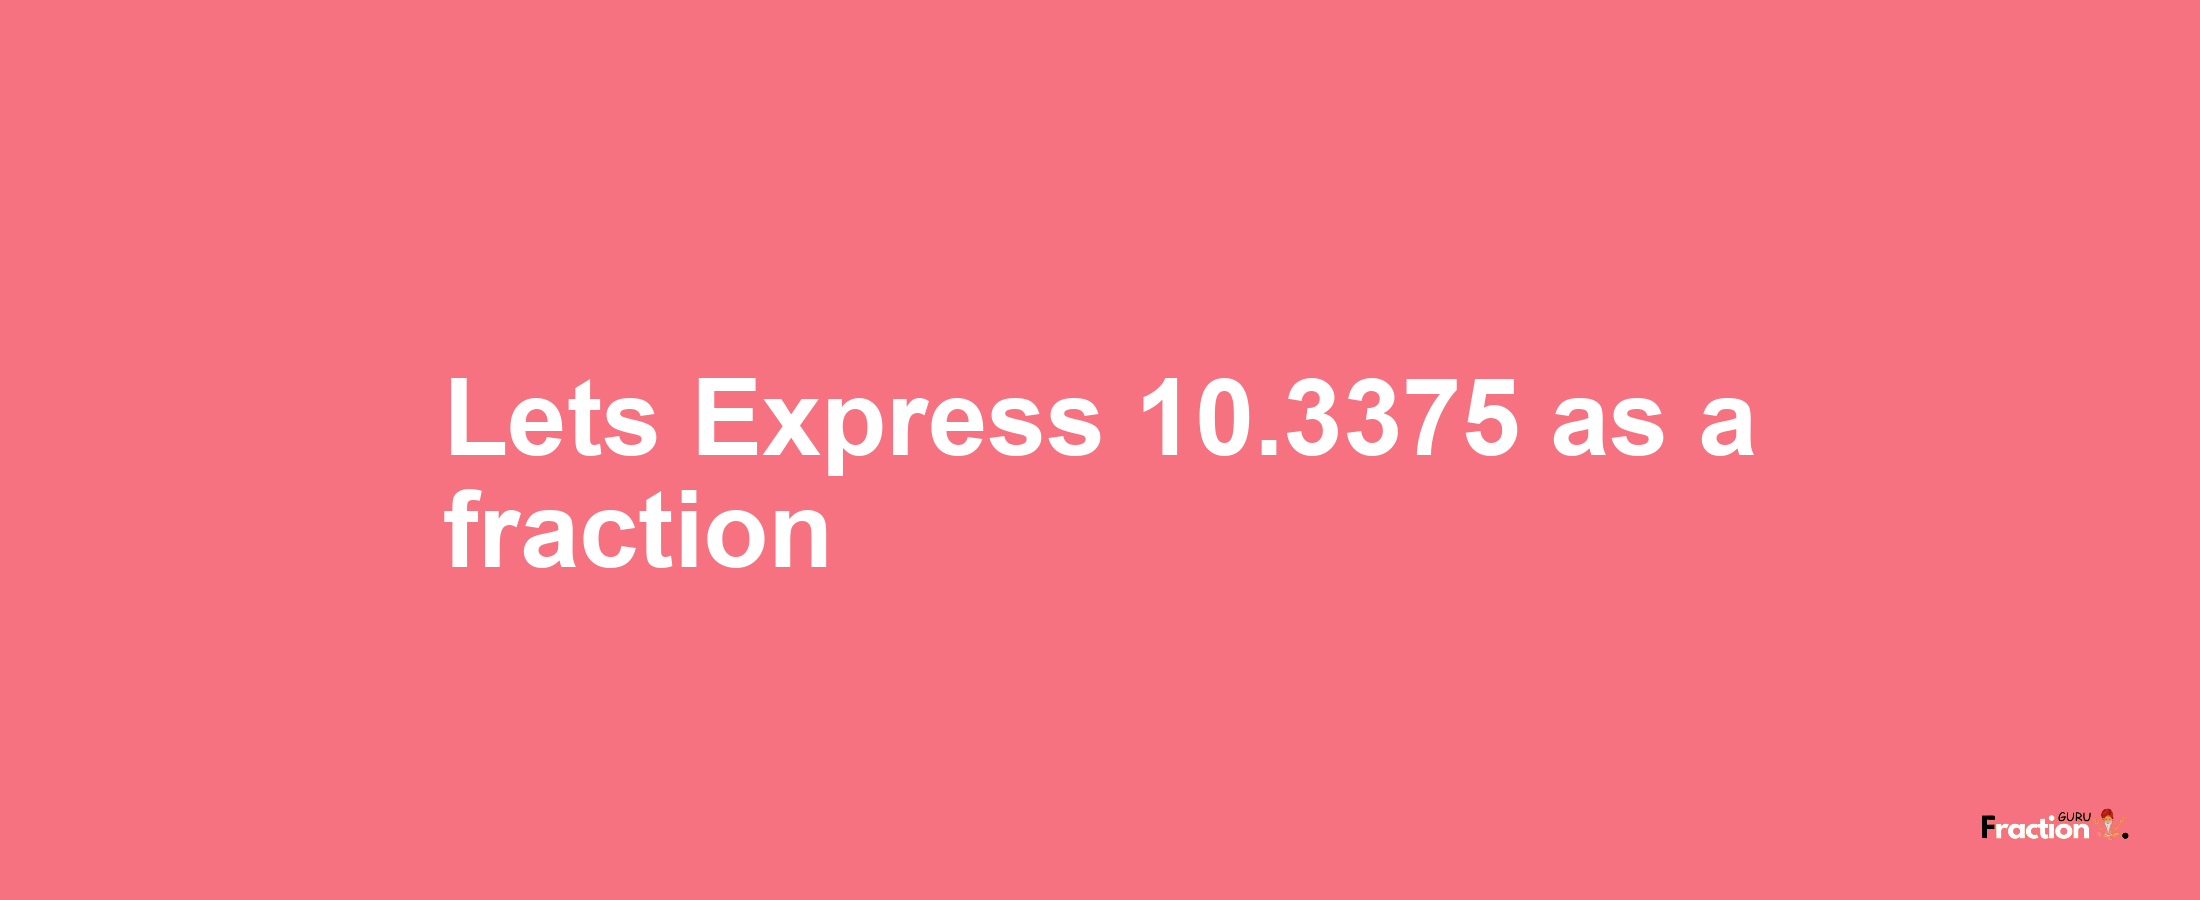 Lets Express 10.3375 as afraction